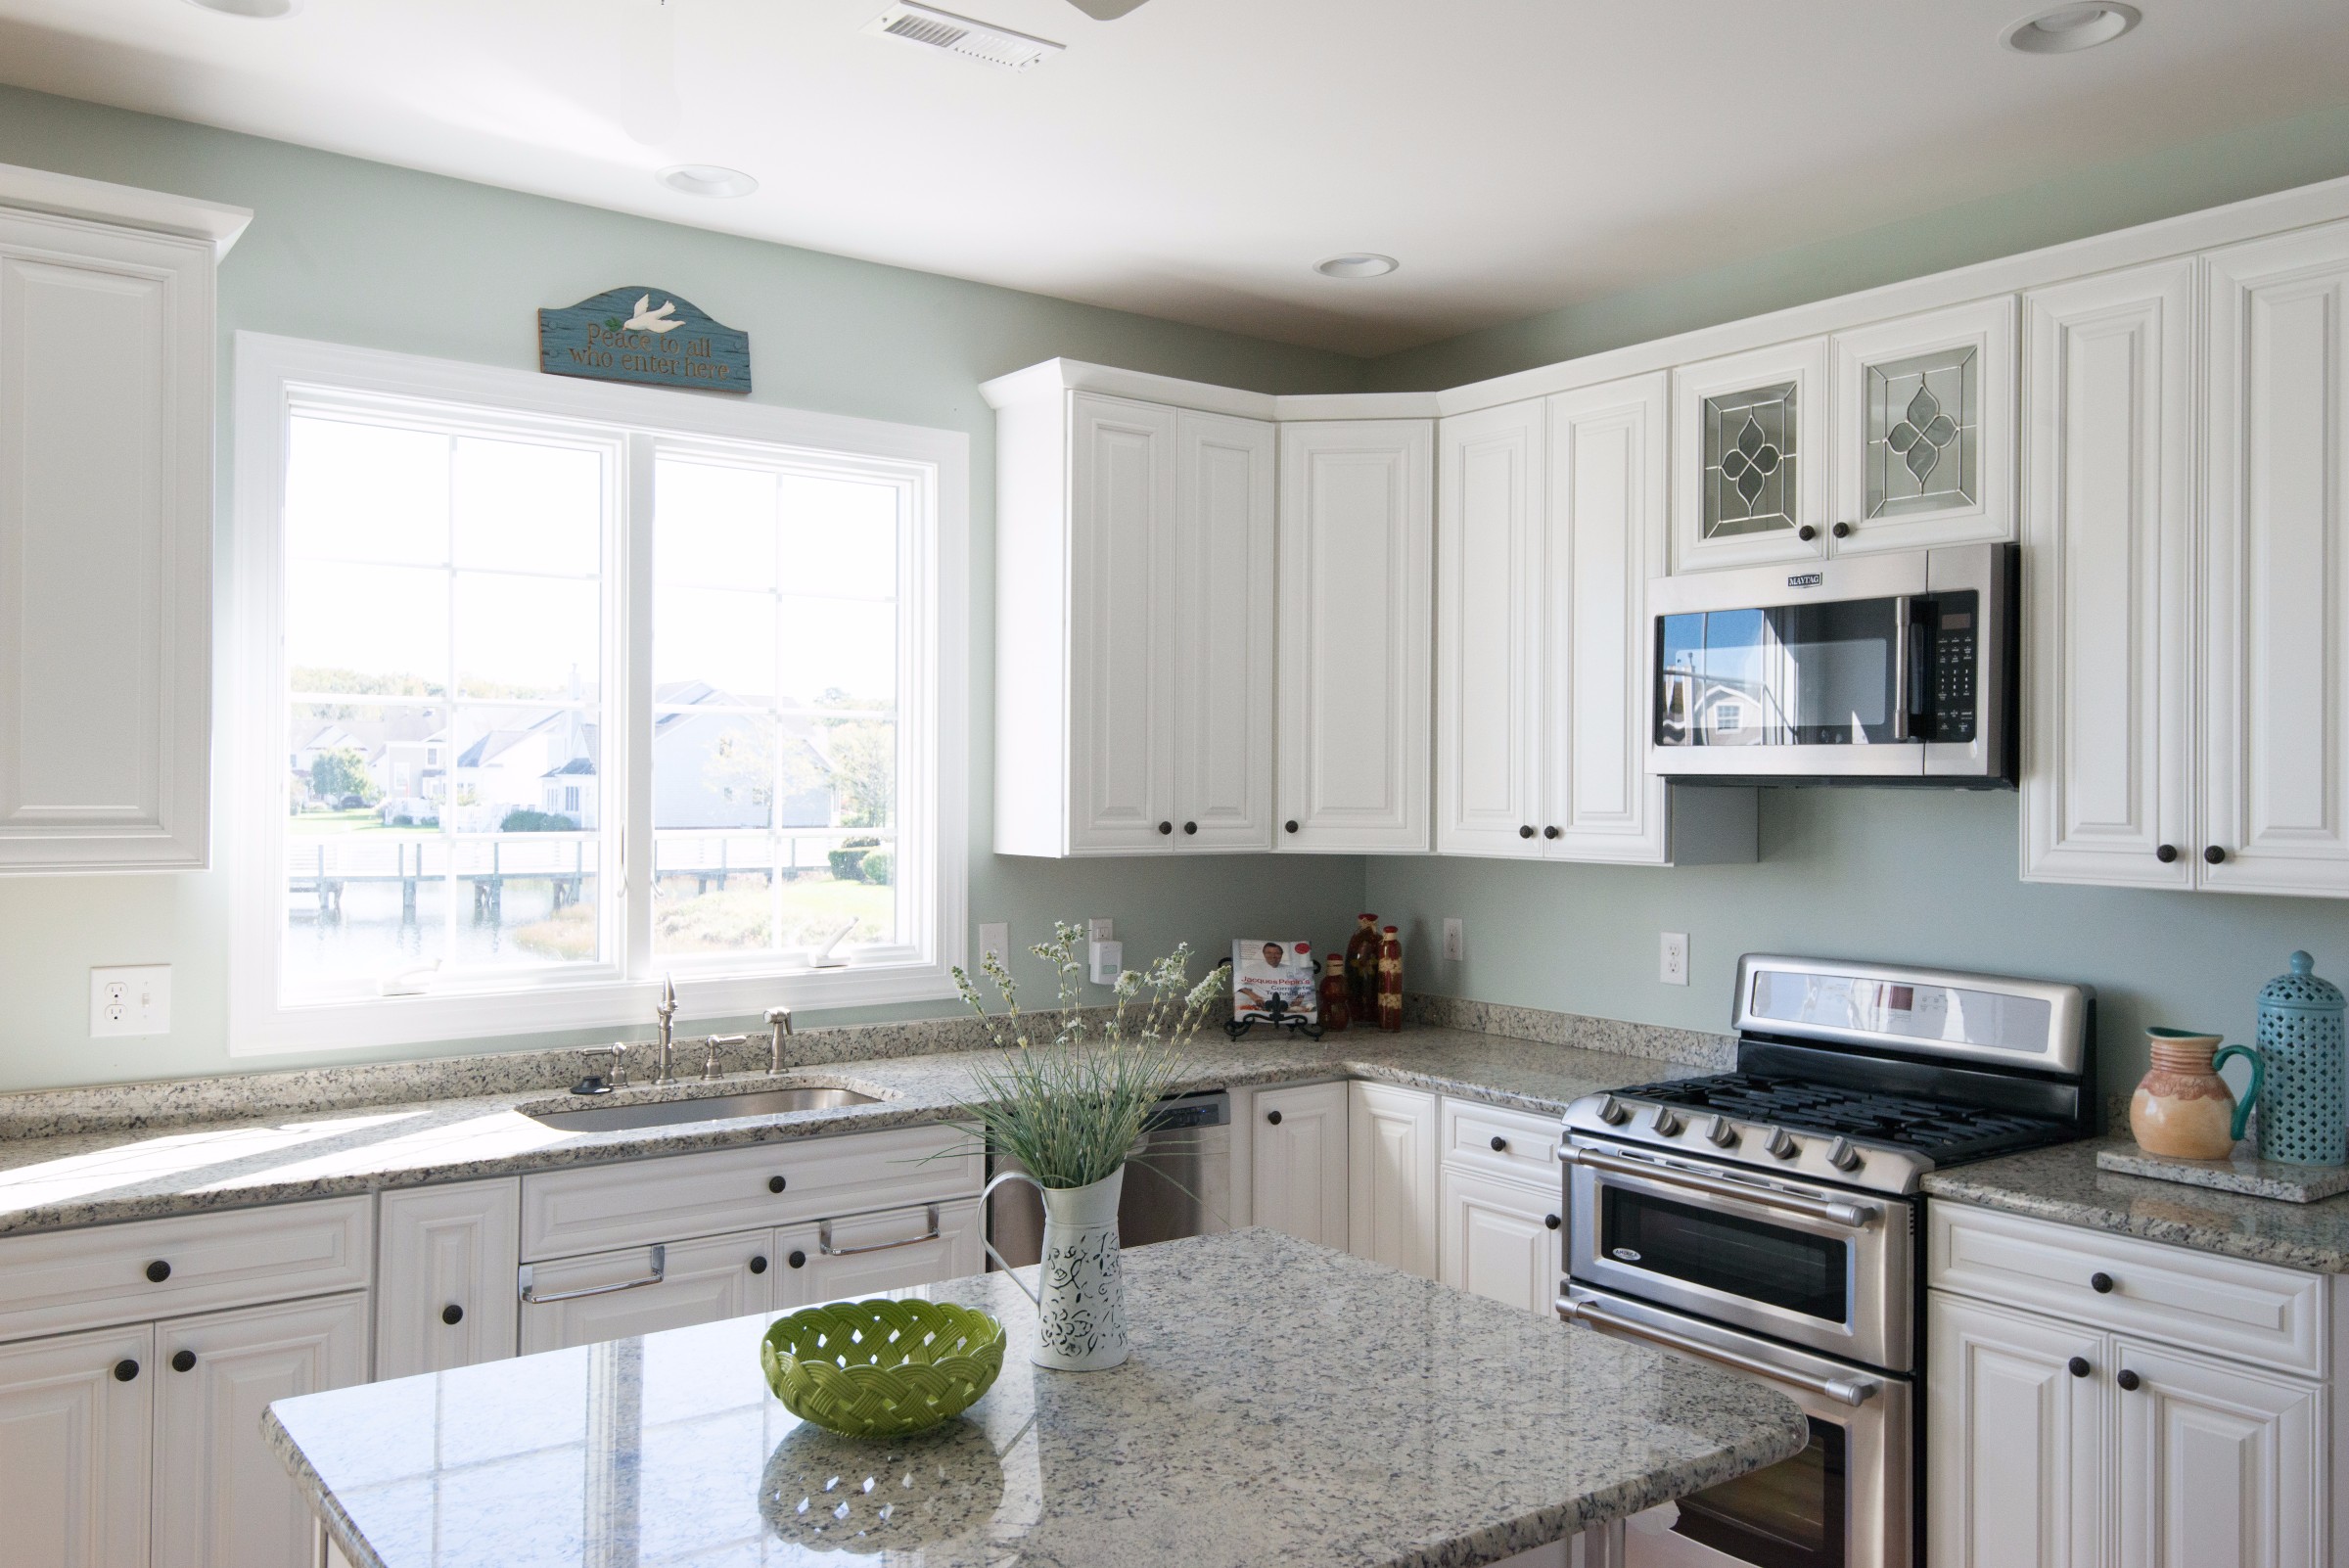 Kitchen Remodel in Bethany Lakes, Bethany Beach DE with Blanco Tulum Granite Countertop and White Cabinets